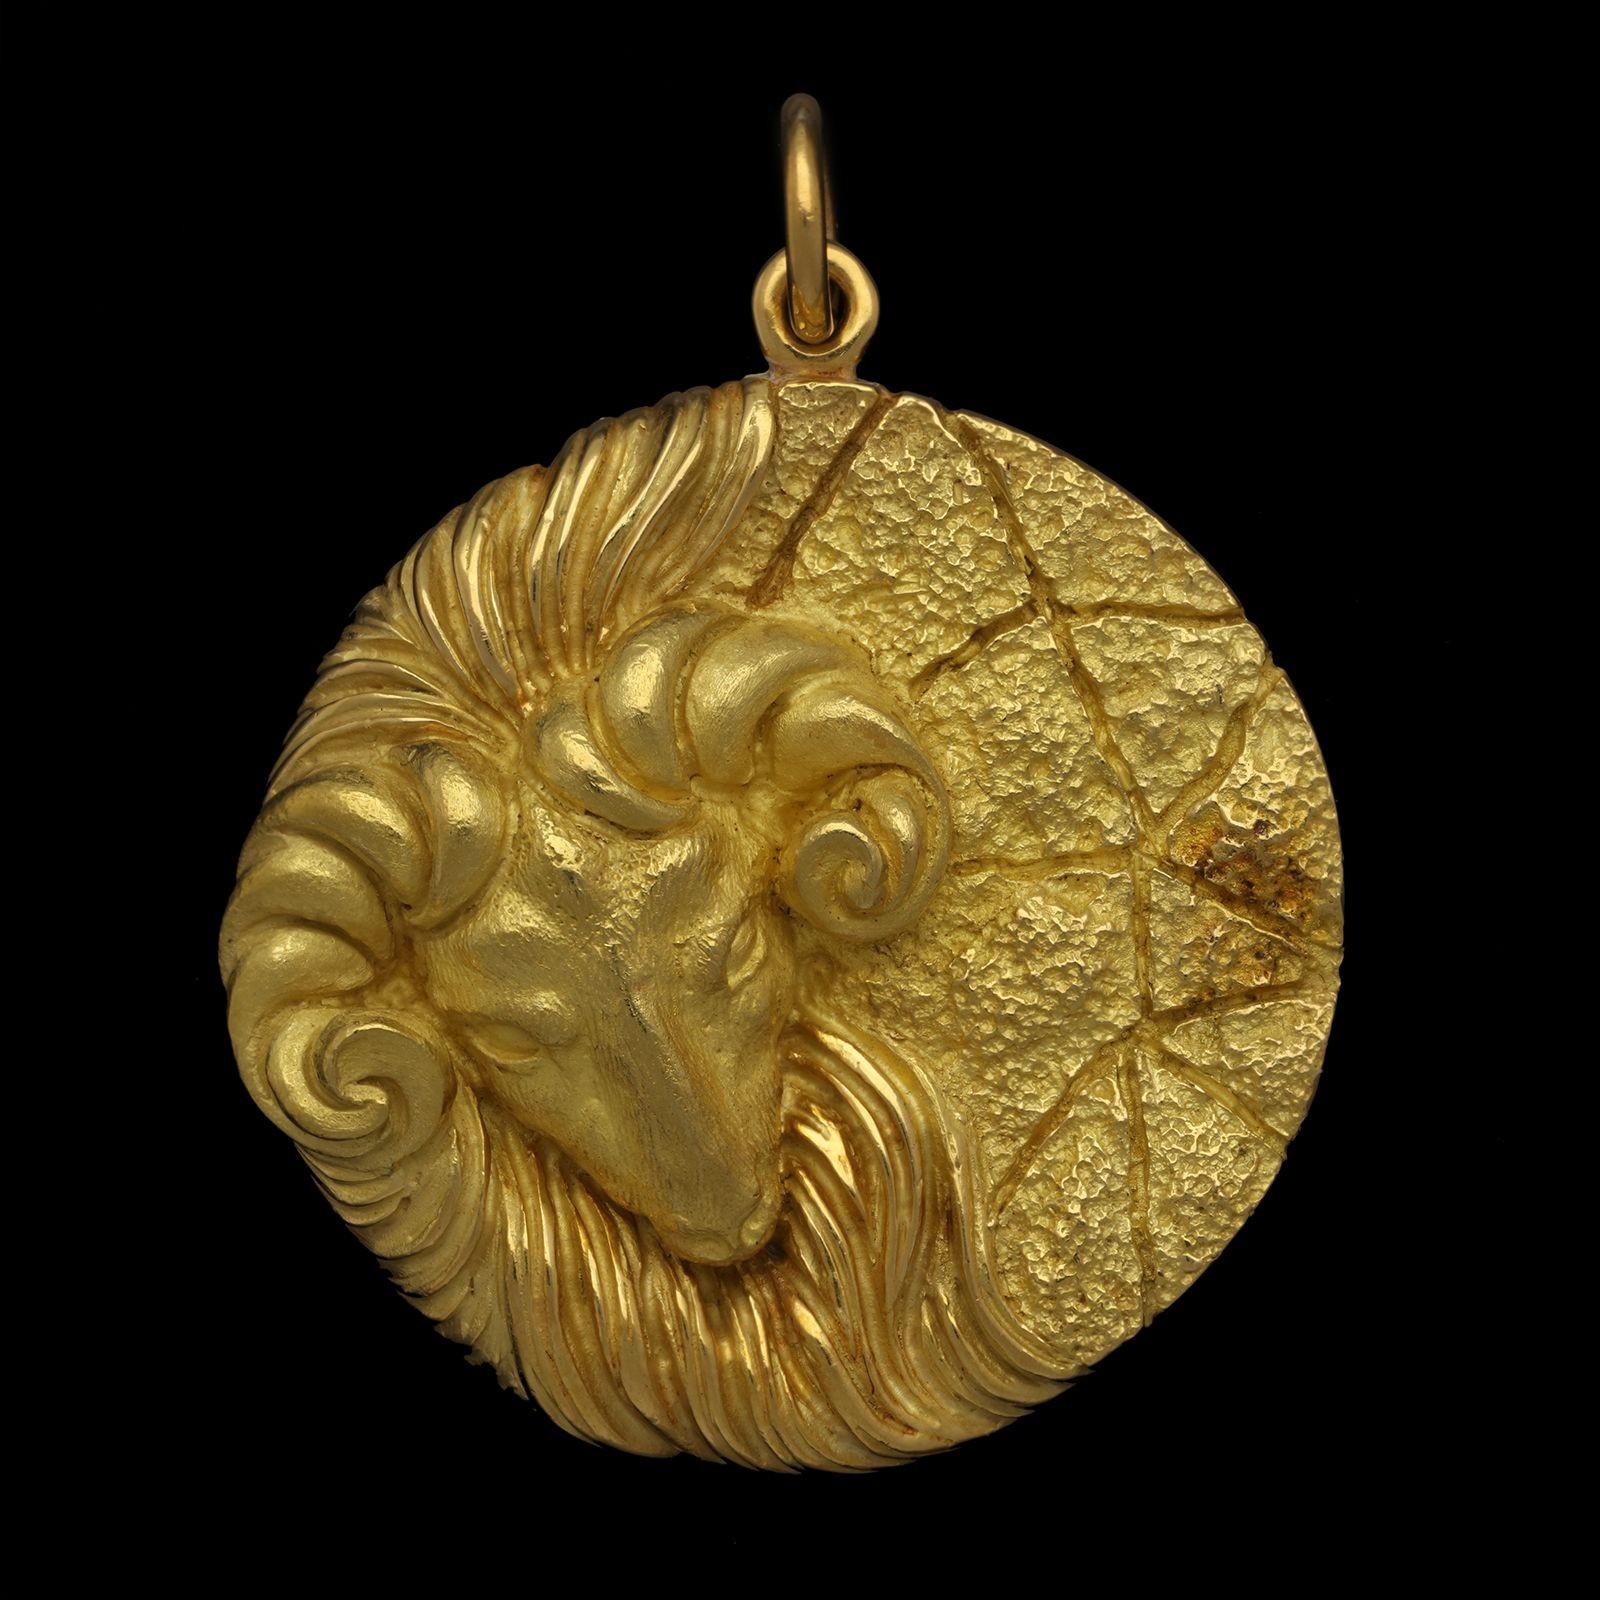 A large vintage Aries zodiac pendant by Tiffany & Co, circa 1970s, the circular disc pendant measuring 1.7” in diameter and formed of 18ct gold with a textured finish, on one side it depicts the head and shoulders of a ram in high relief, the